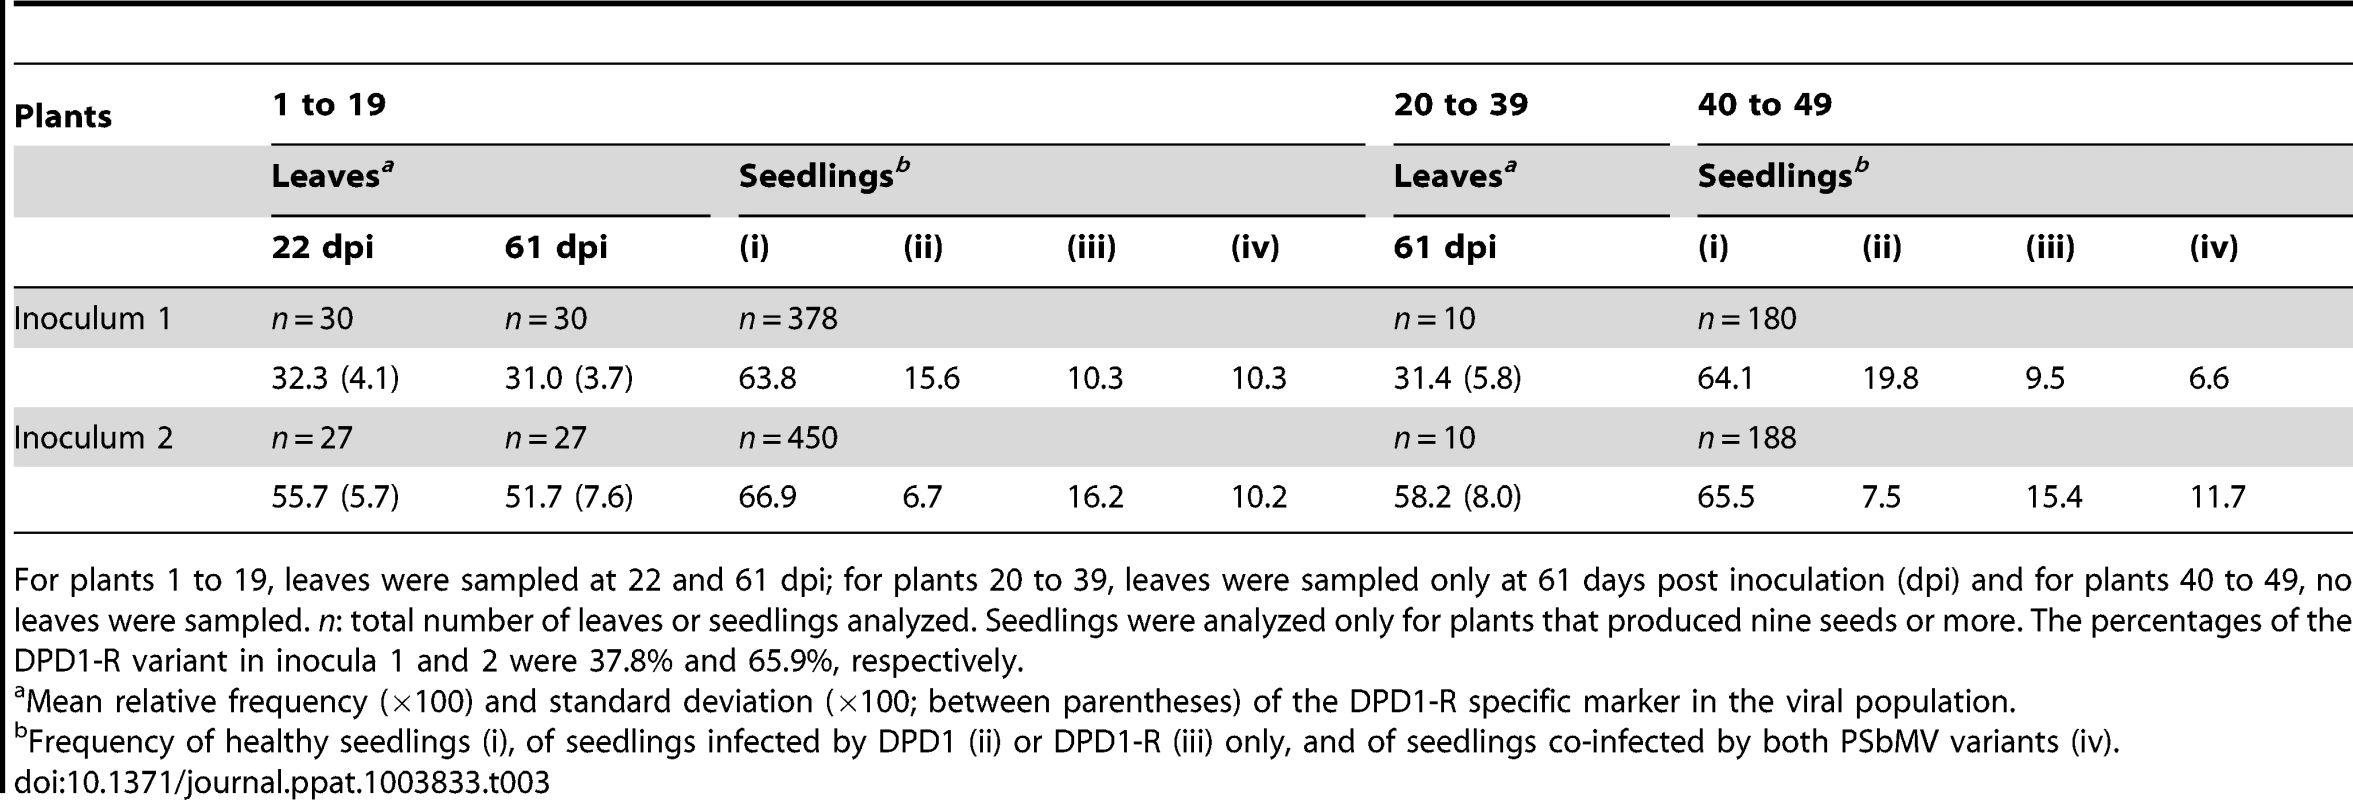 Frequency of two PSbMV variants in pea leaves and seedlings in three sets of plants corresponding to three sampling designs.